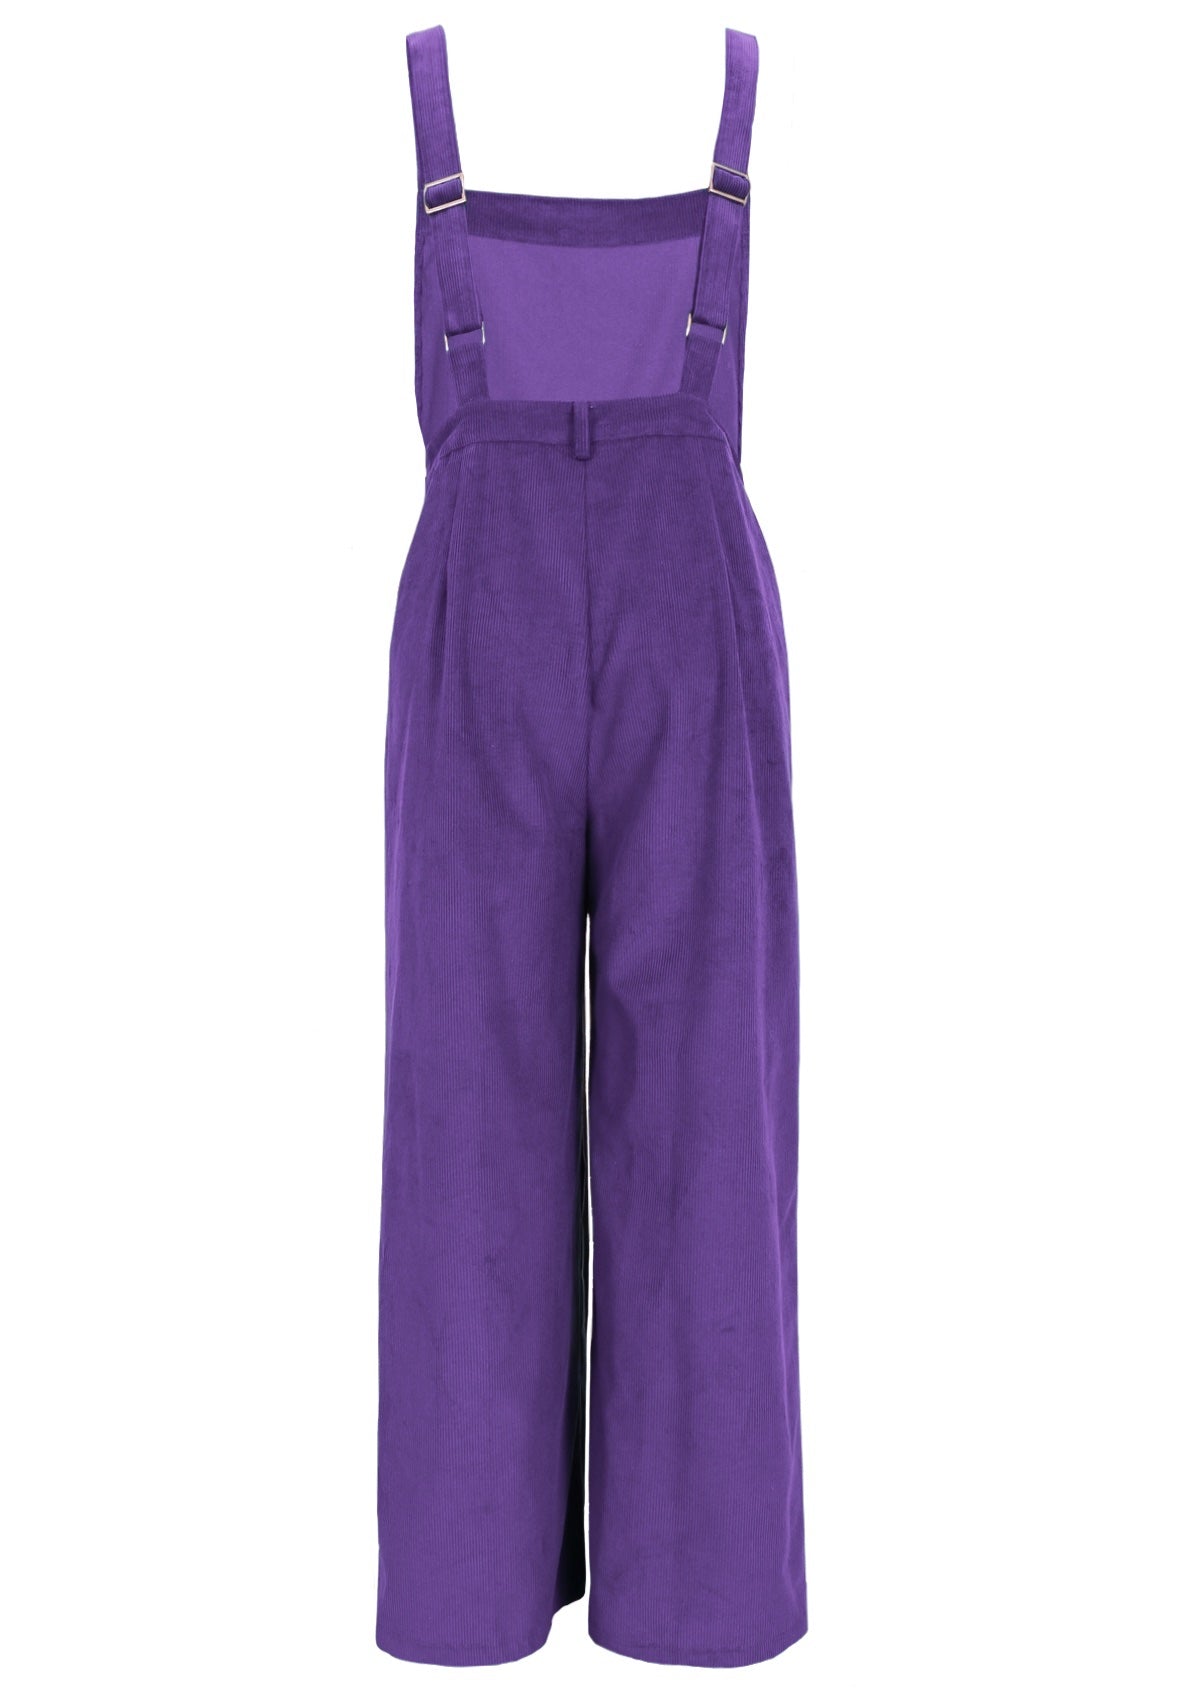 Purple corduroy overalls with adjustable straps and belt loops back view